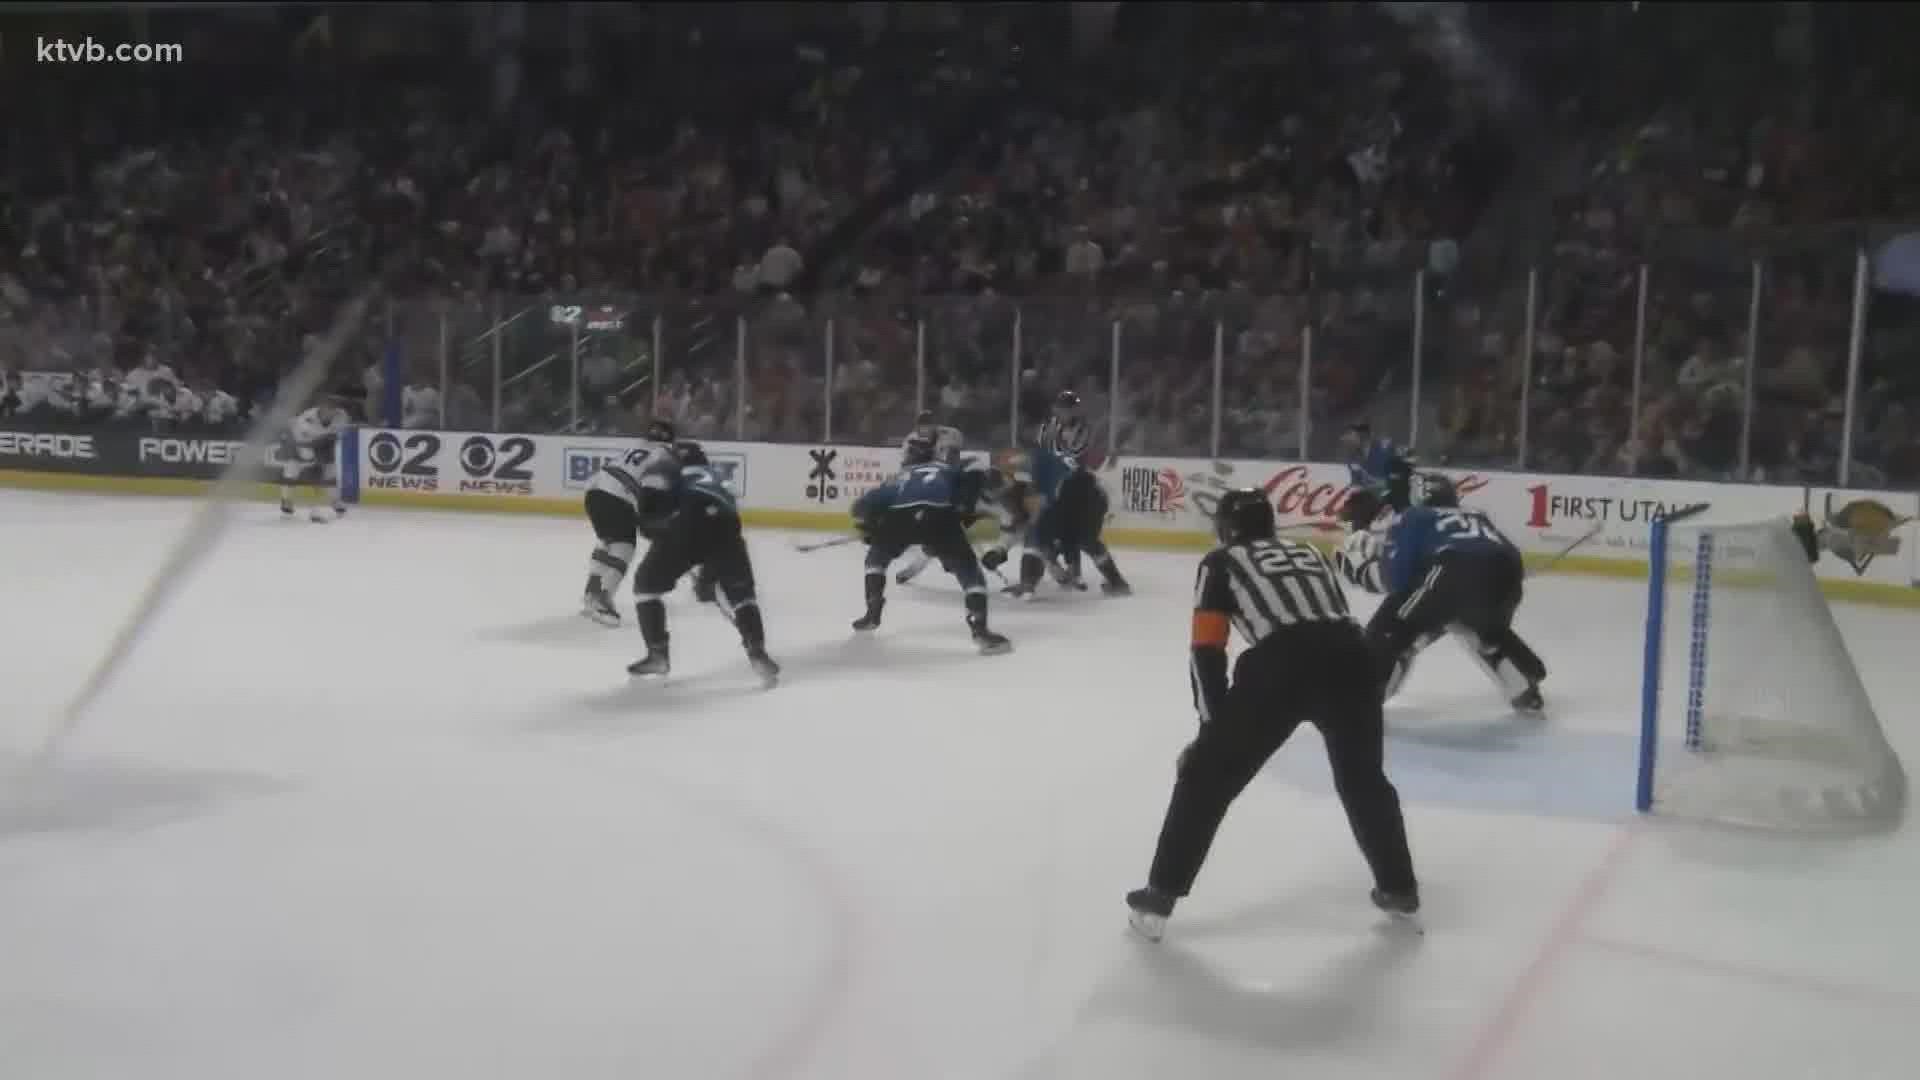 The steelheads were eliminated from the playoffs with a pair of losses this weekend in Utah.